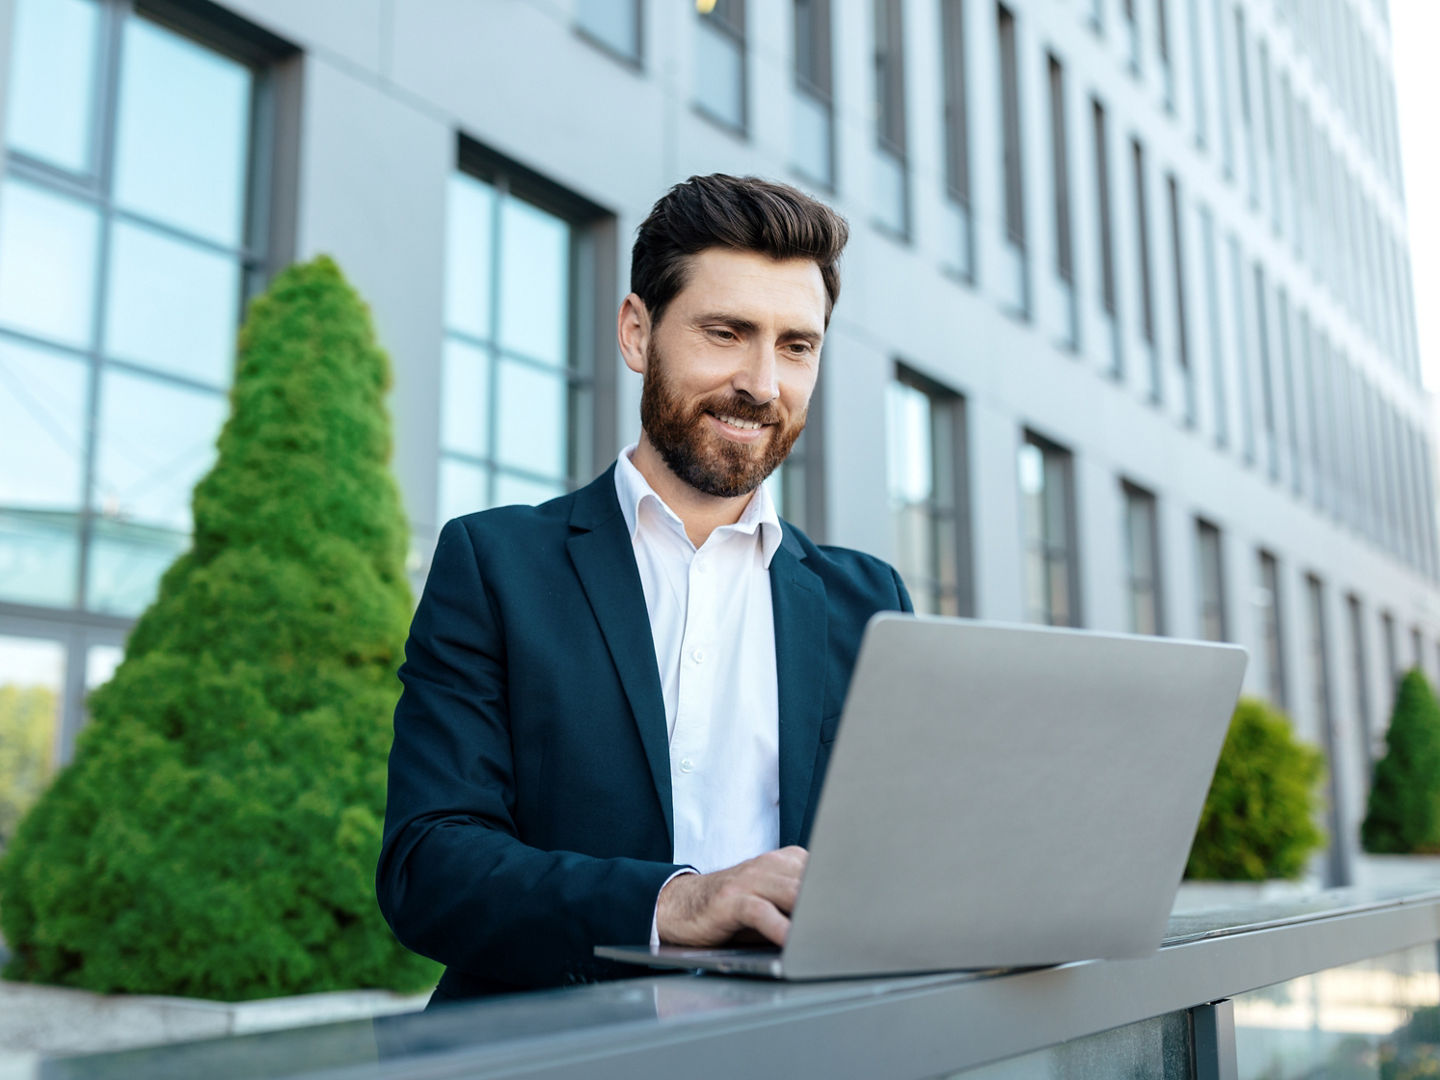 Smiling confident millennial attractive european businessman with beard in suit chatting on laptop near modern office building. Manager work outdoor, successful business with technology and new normal